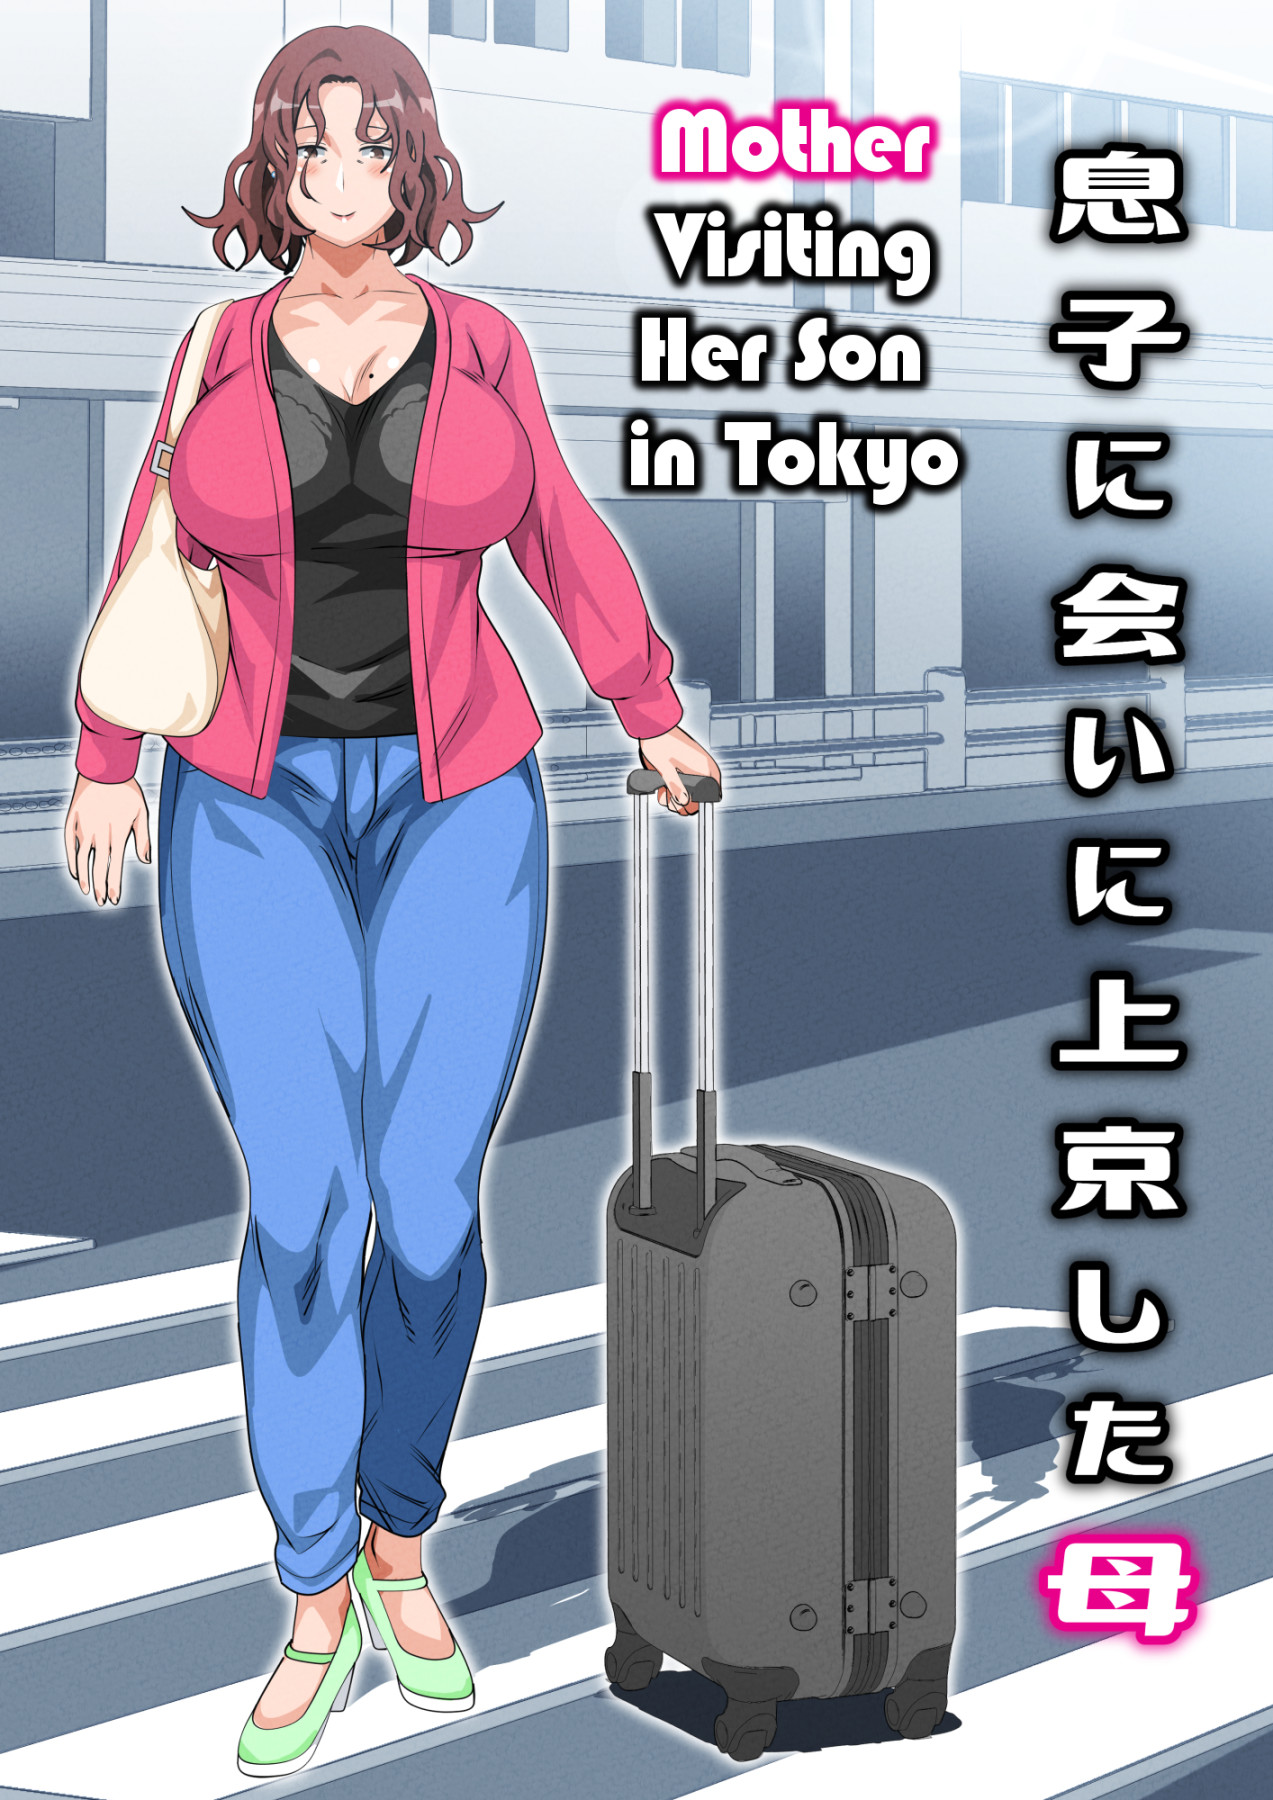 Hentai Manga Comic-Mother Visiting Her Son in Tokyo-Read-2